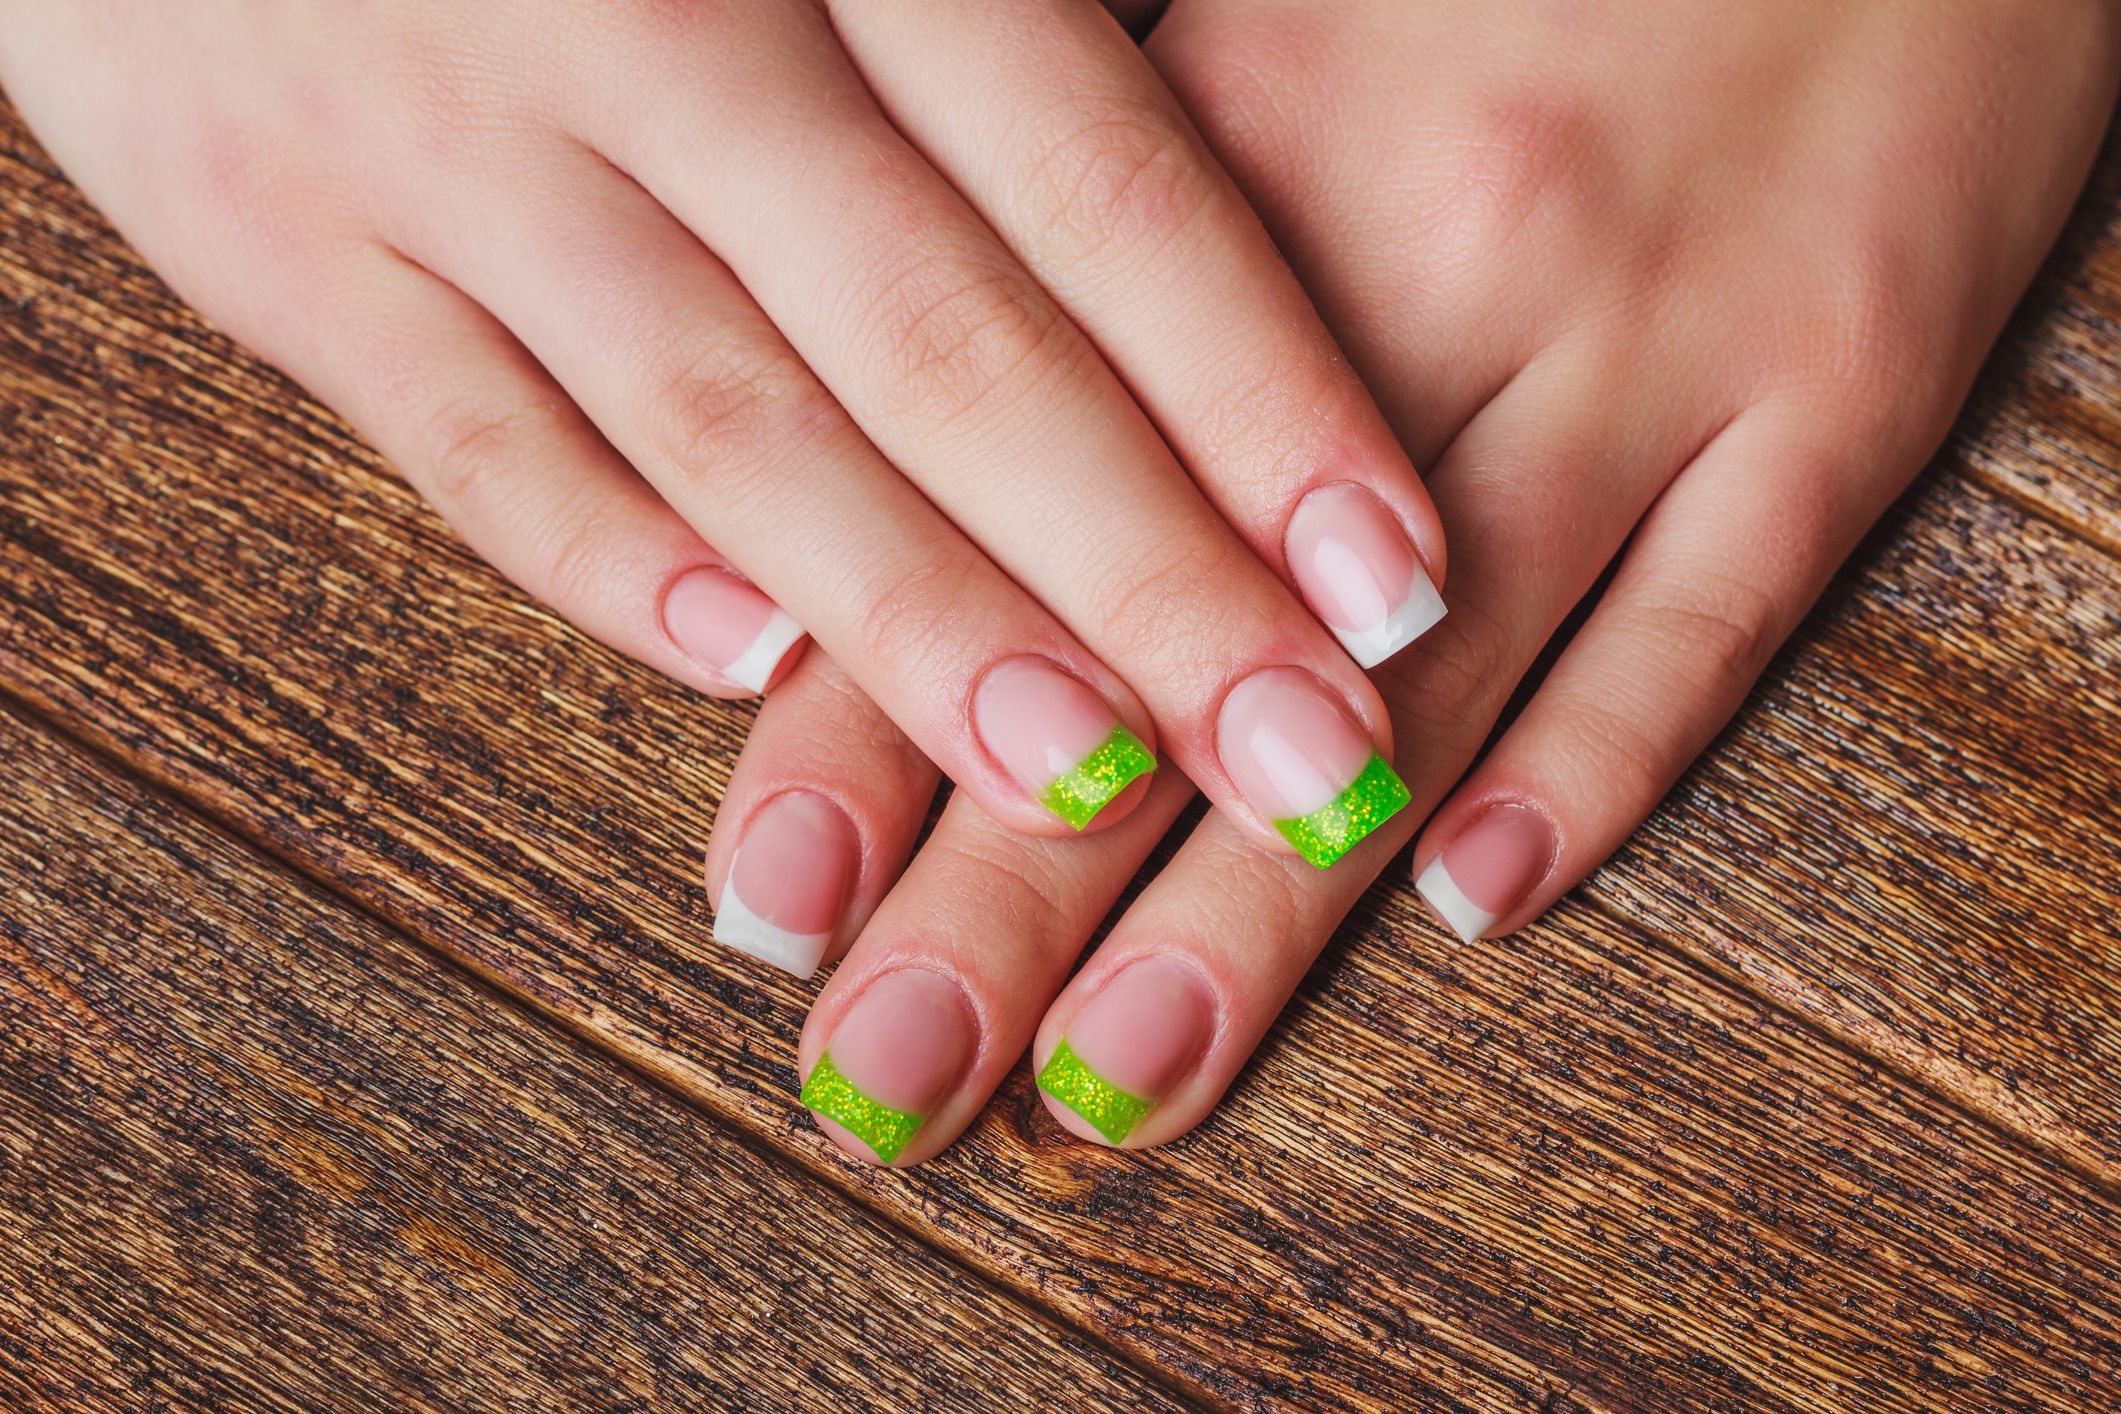 Nail Art for St Patrick's Day | 2021 Rainbow Design - The Nail Chronicle